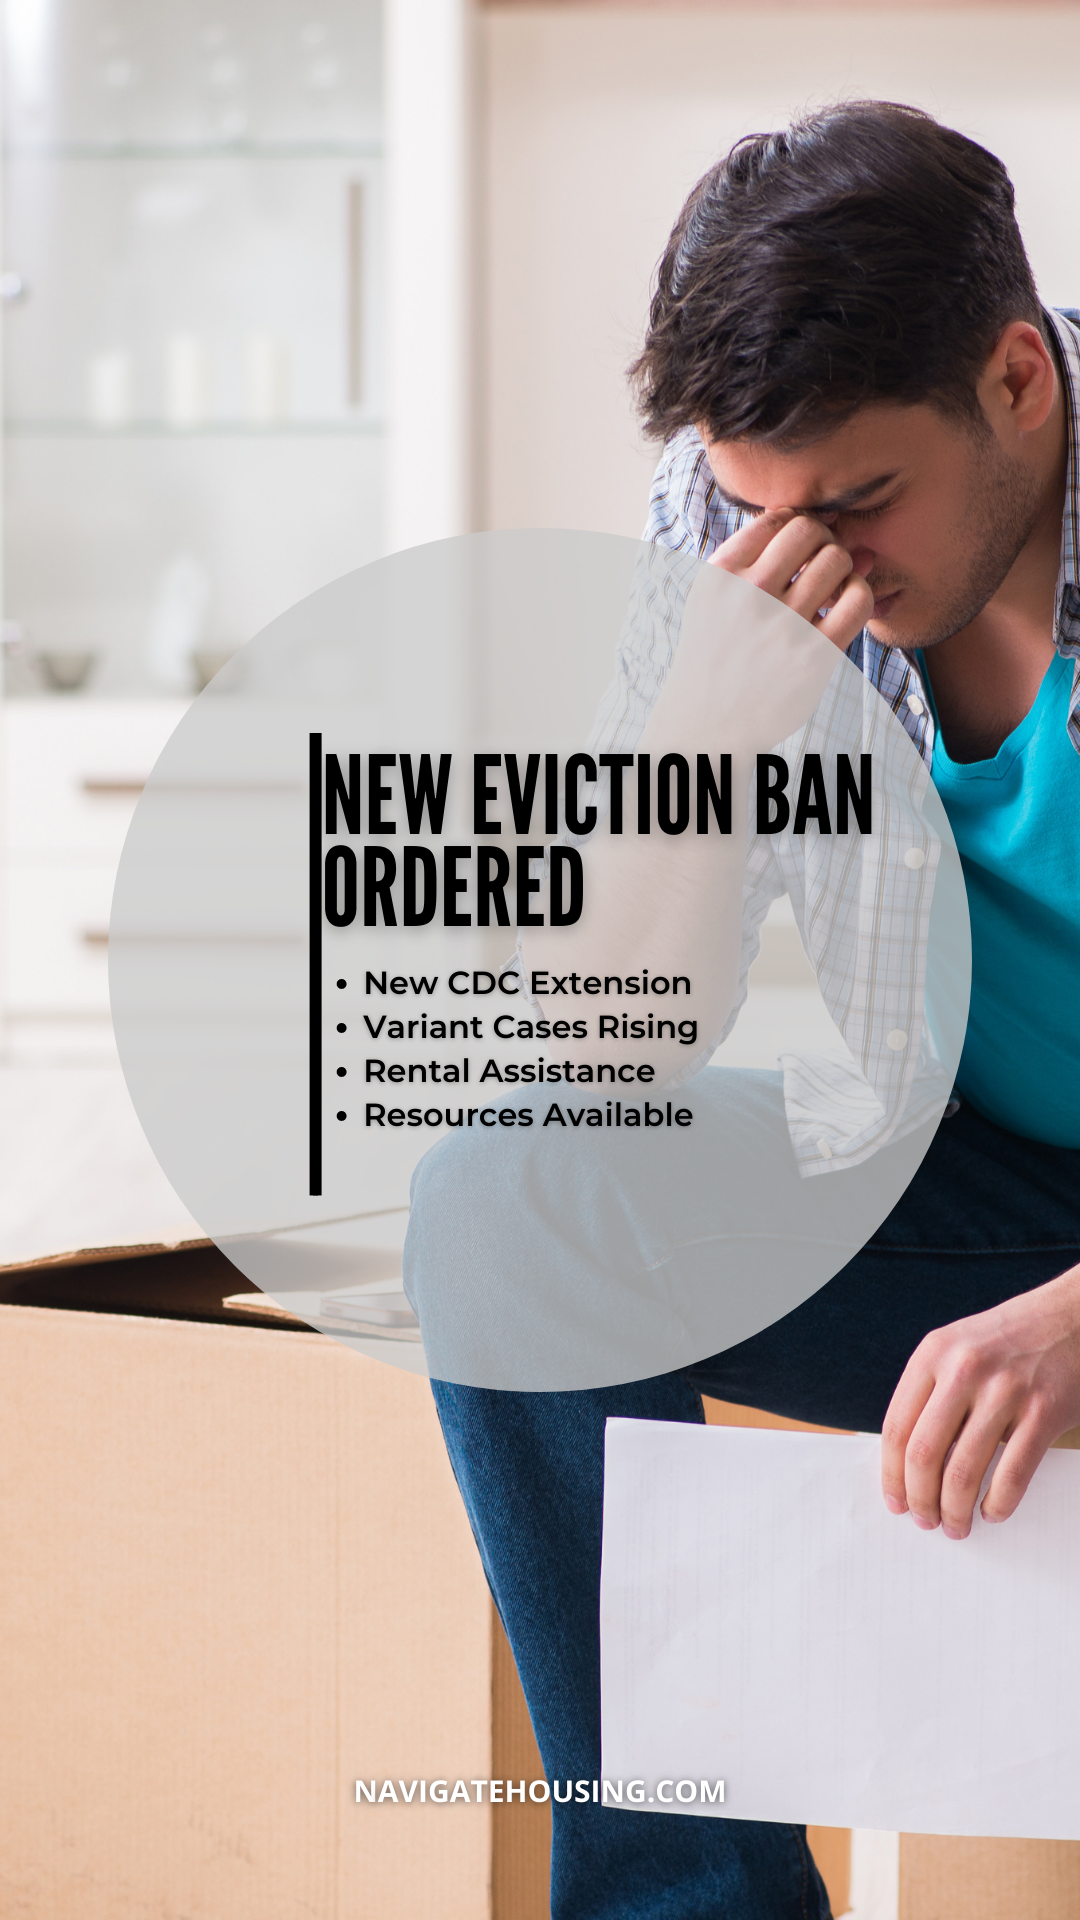 New Eviction Ban Ordered